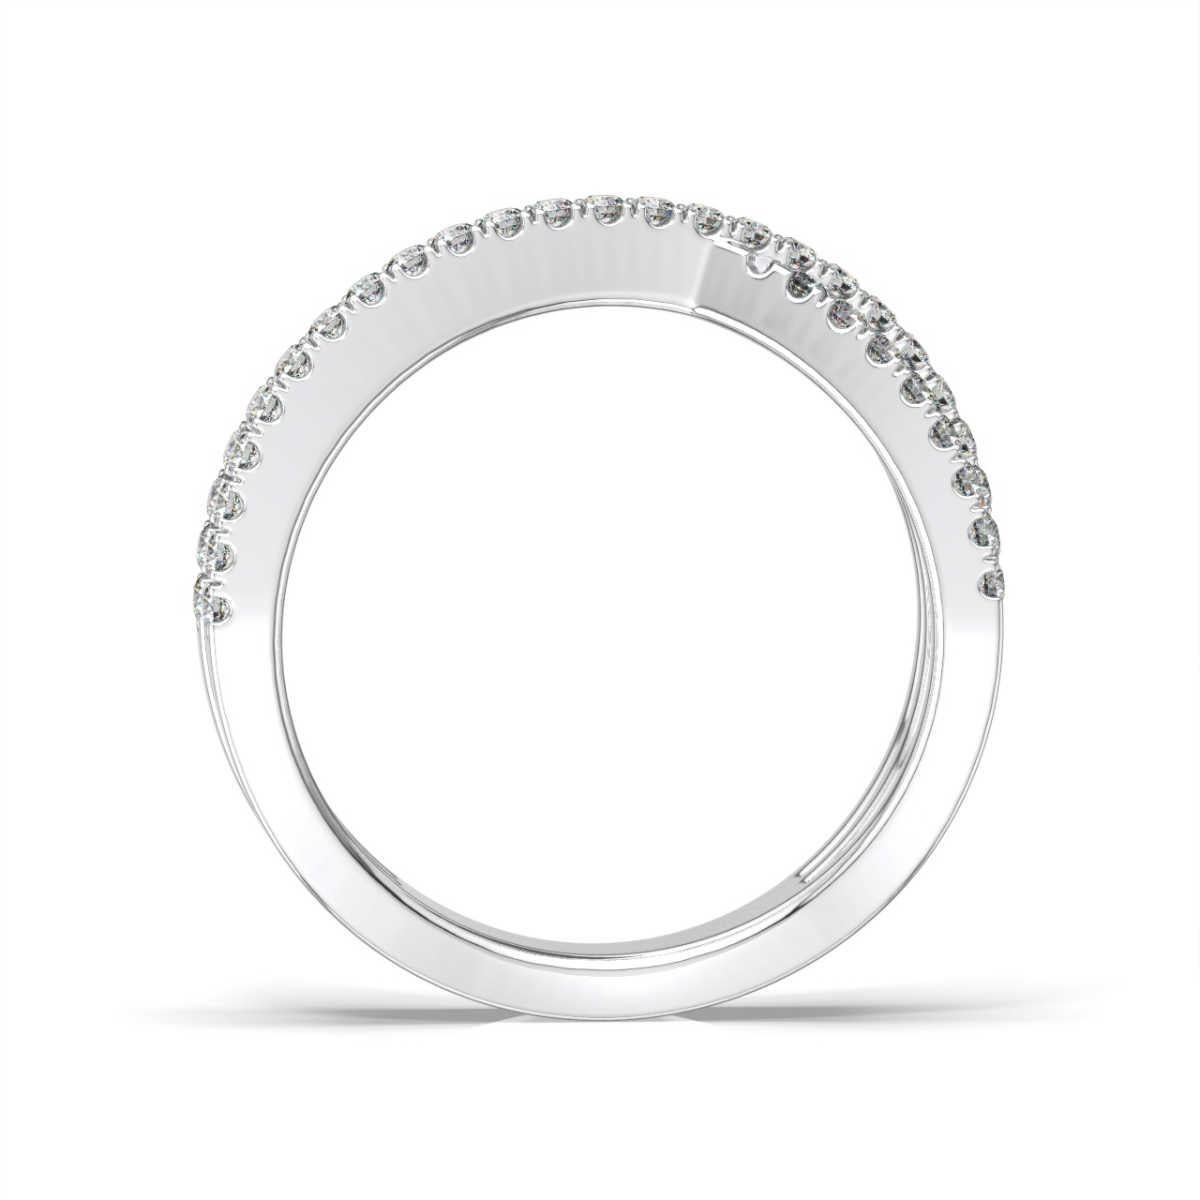 This contemporary, fashionable ring features three rows of Interweave Micro Prongs set diamonds.

Product details: 

Center Gemstone Color: WHITE
Side Gemstone Type: NATURAL DIAMOND
Side Gemstone Shape: ROUND
Metal: 18K White Gold
Metal Weight: